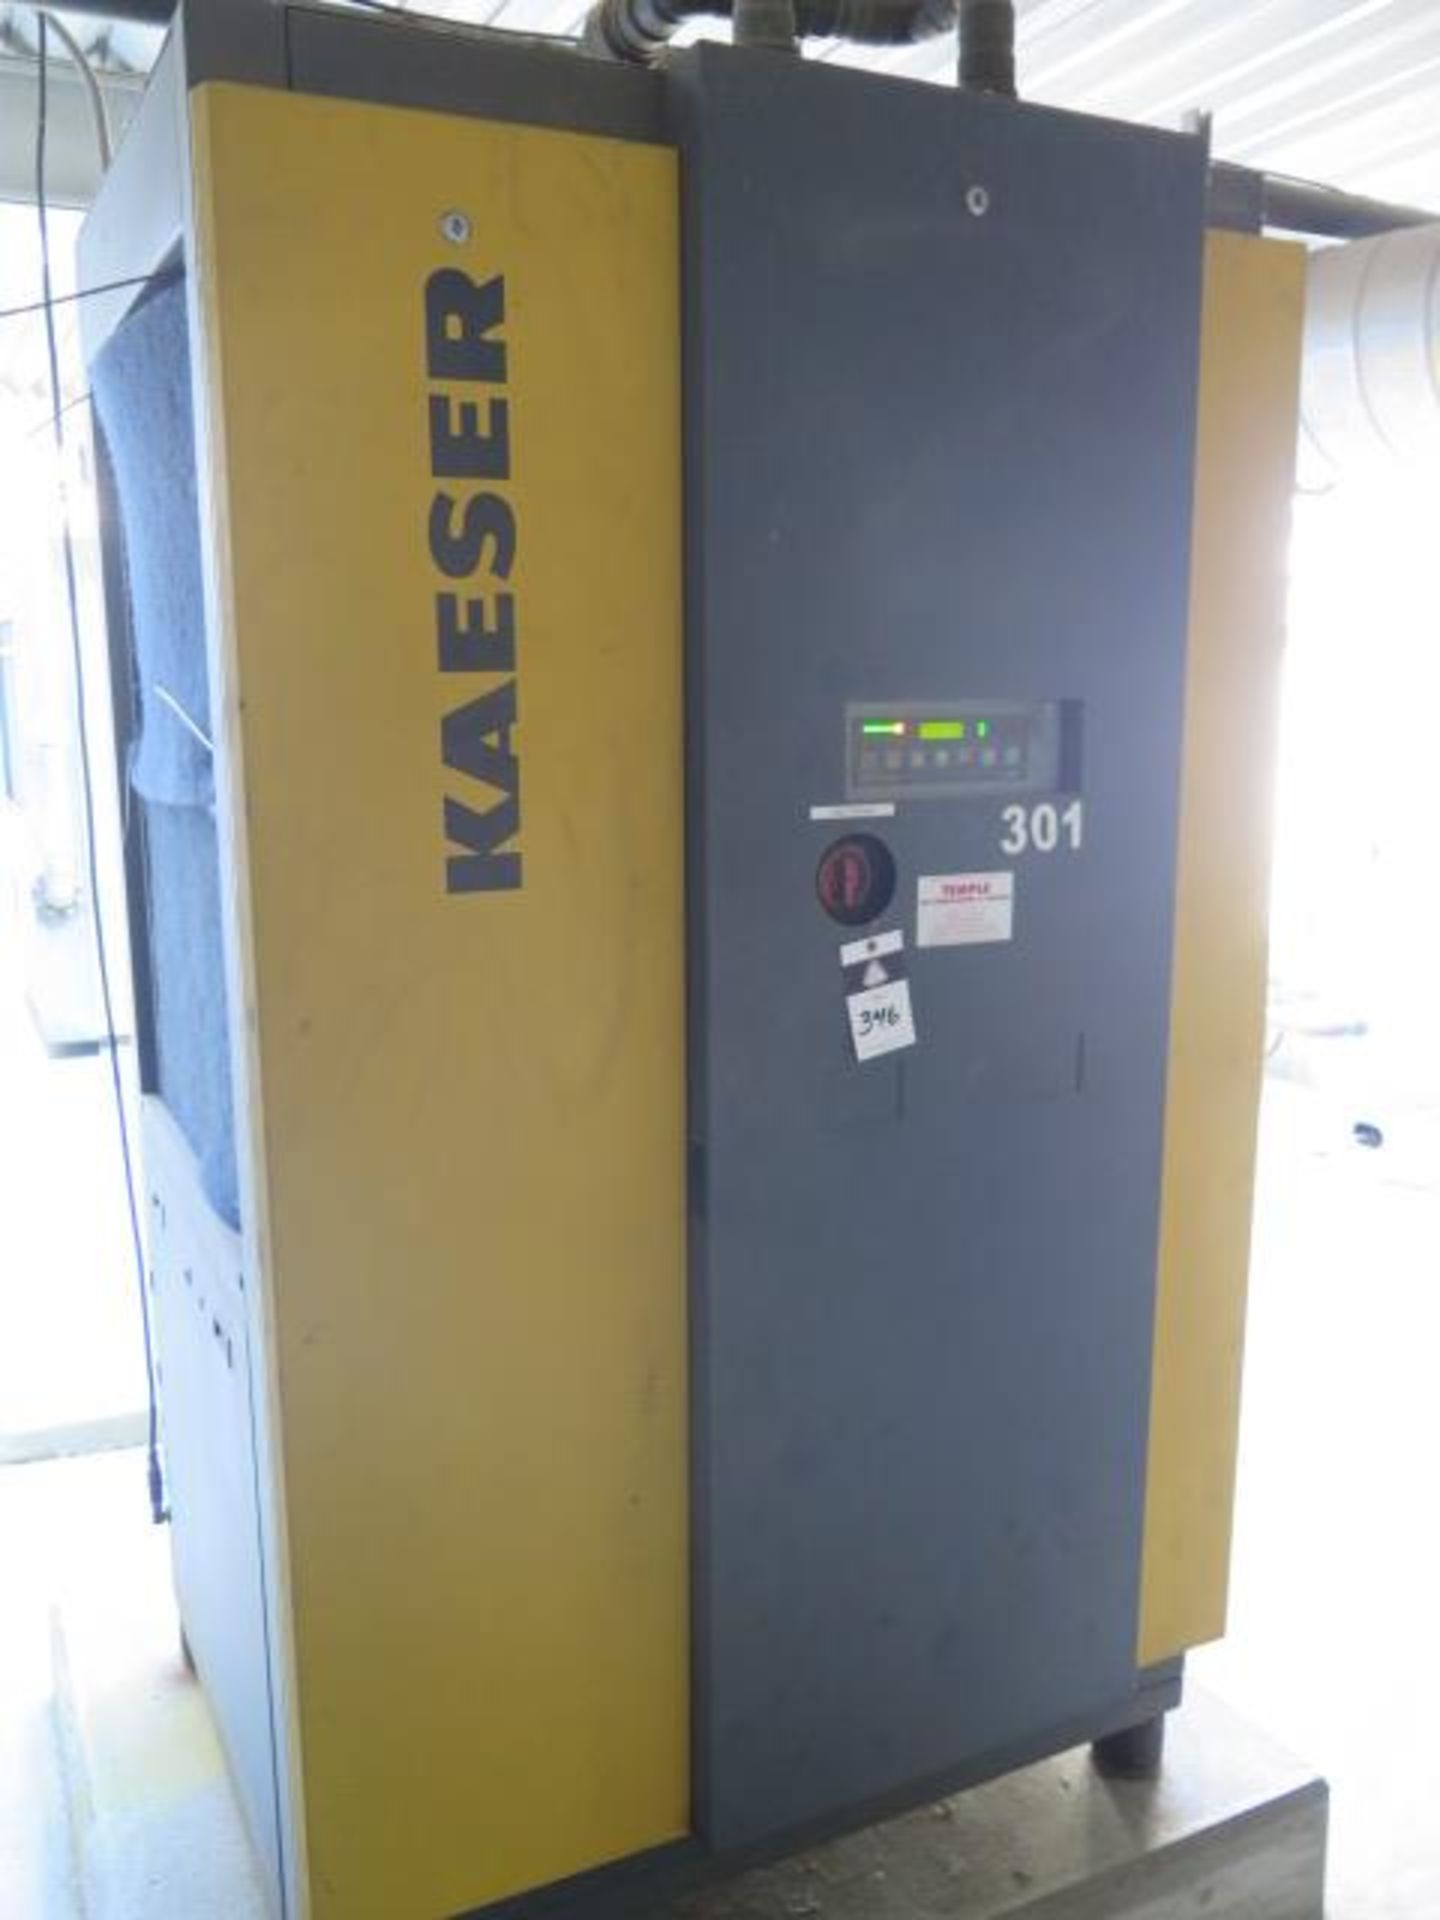 Kaeser 301 Refrigerated Air Dryer (SOLD AS-IS - NO WARRANTY)